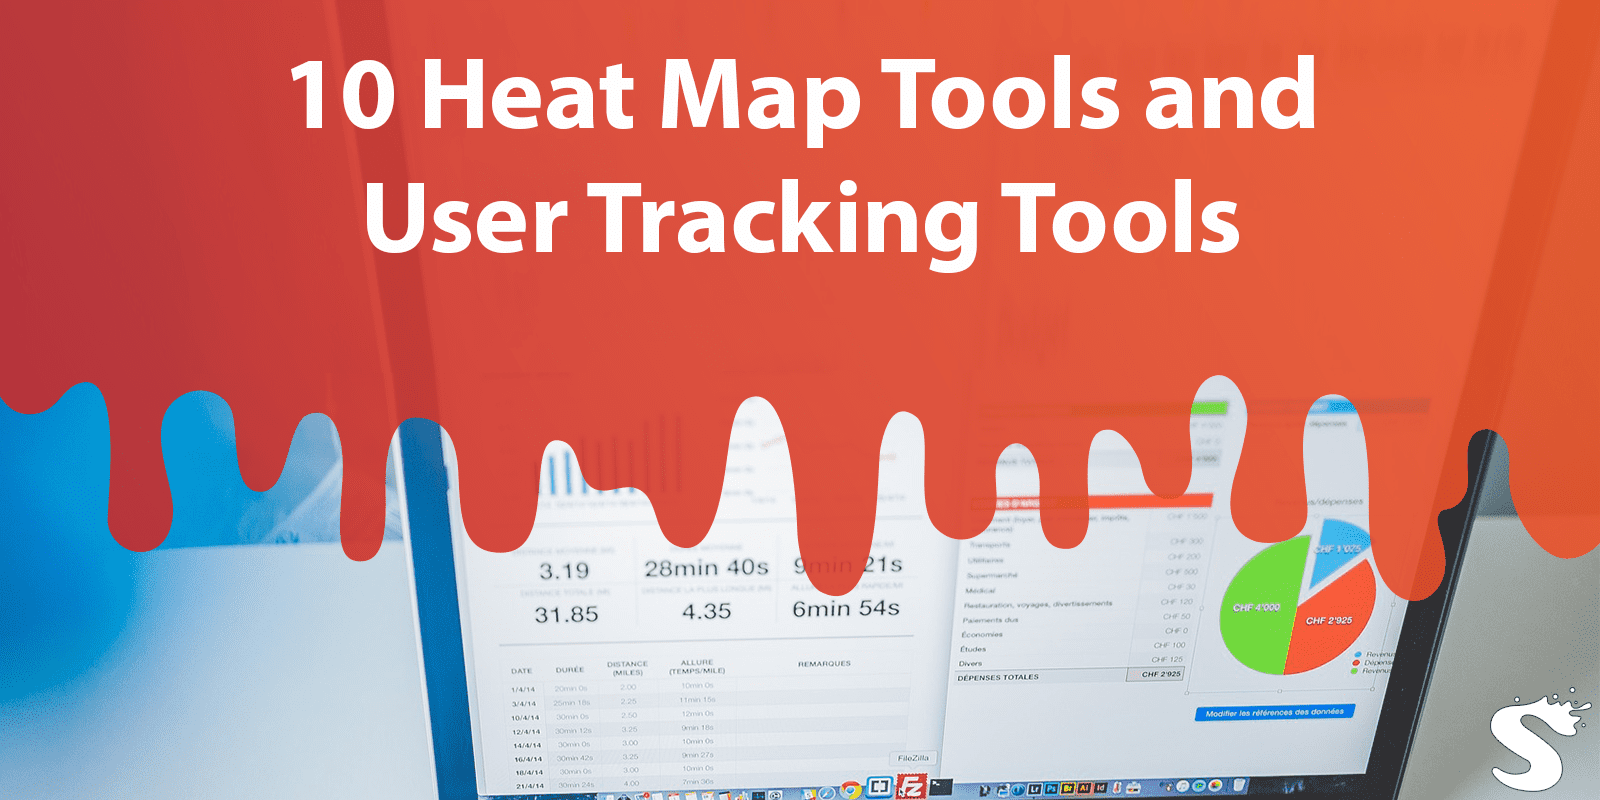 10 Heat Map Tools and User Tracking Tools